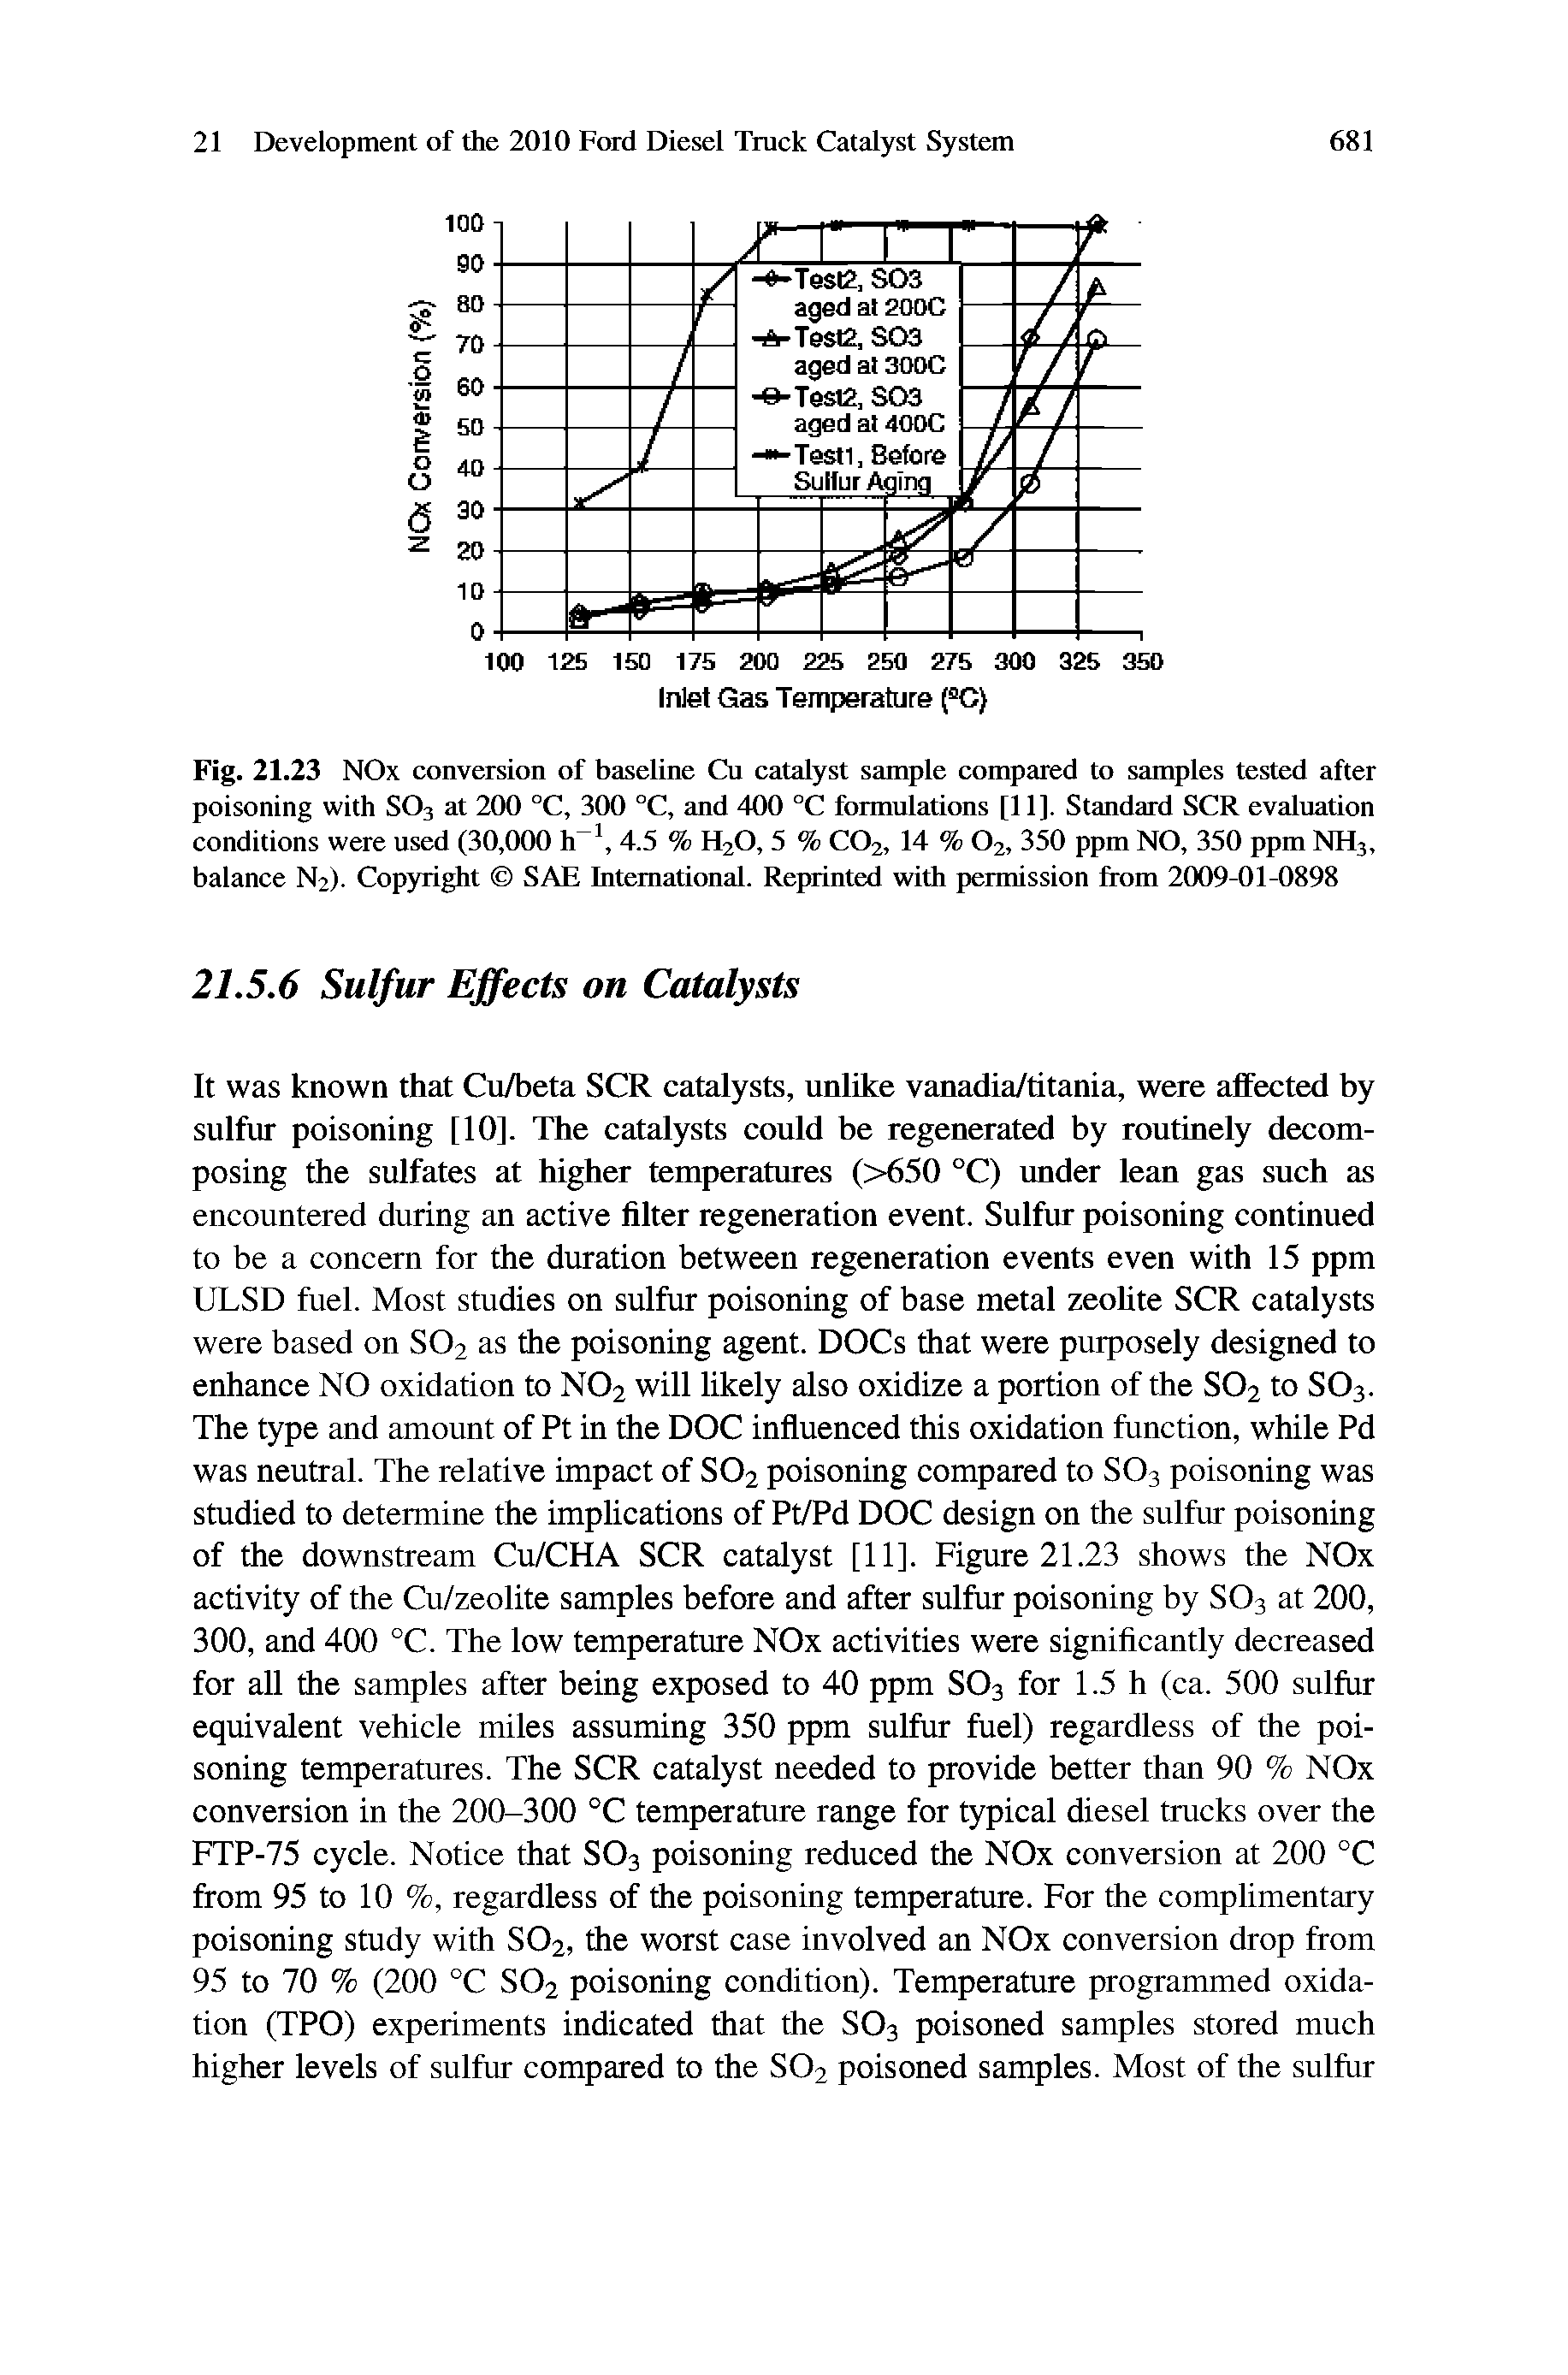 Fig. 21.23 NOx conversion of baseline Cu catalyst sample compared to samples tested after poisoning with SO3 at 200 °C, 300 °C, and 400 °C formulations [11]. Standard SCR evaluation conditions were used (30,000 h 4.5 % H20,5 % CO2, 14 % O2, 350 ppm NO, 350 ppm NH3, balance N2). Copyright SAE International. Reprinted with permission from 2(X)9-01-0898...